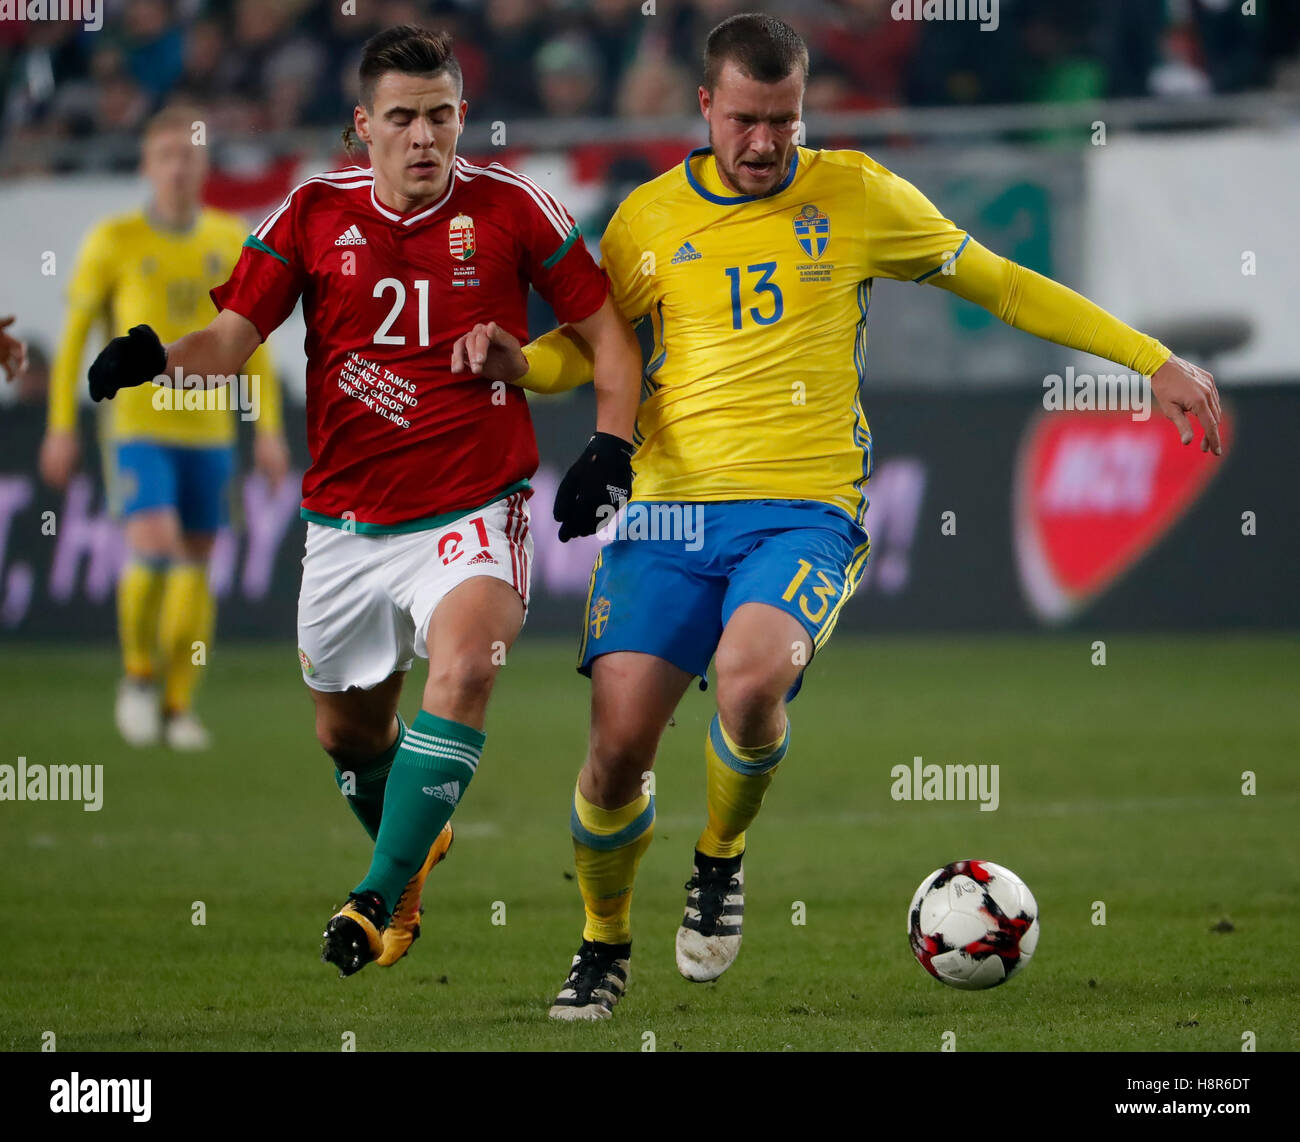 Jakob Johansson High Resolution Stock Photography and Images - Alamy